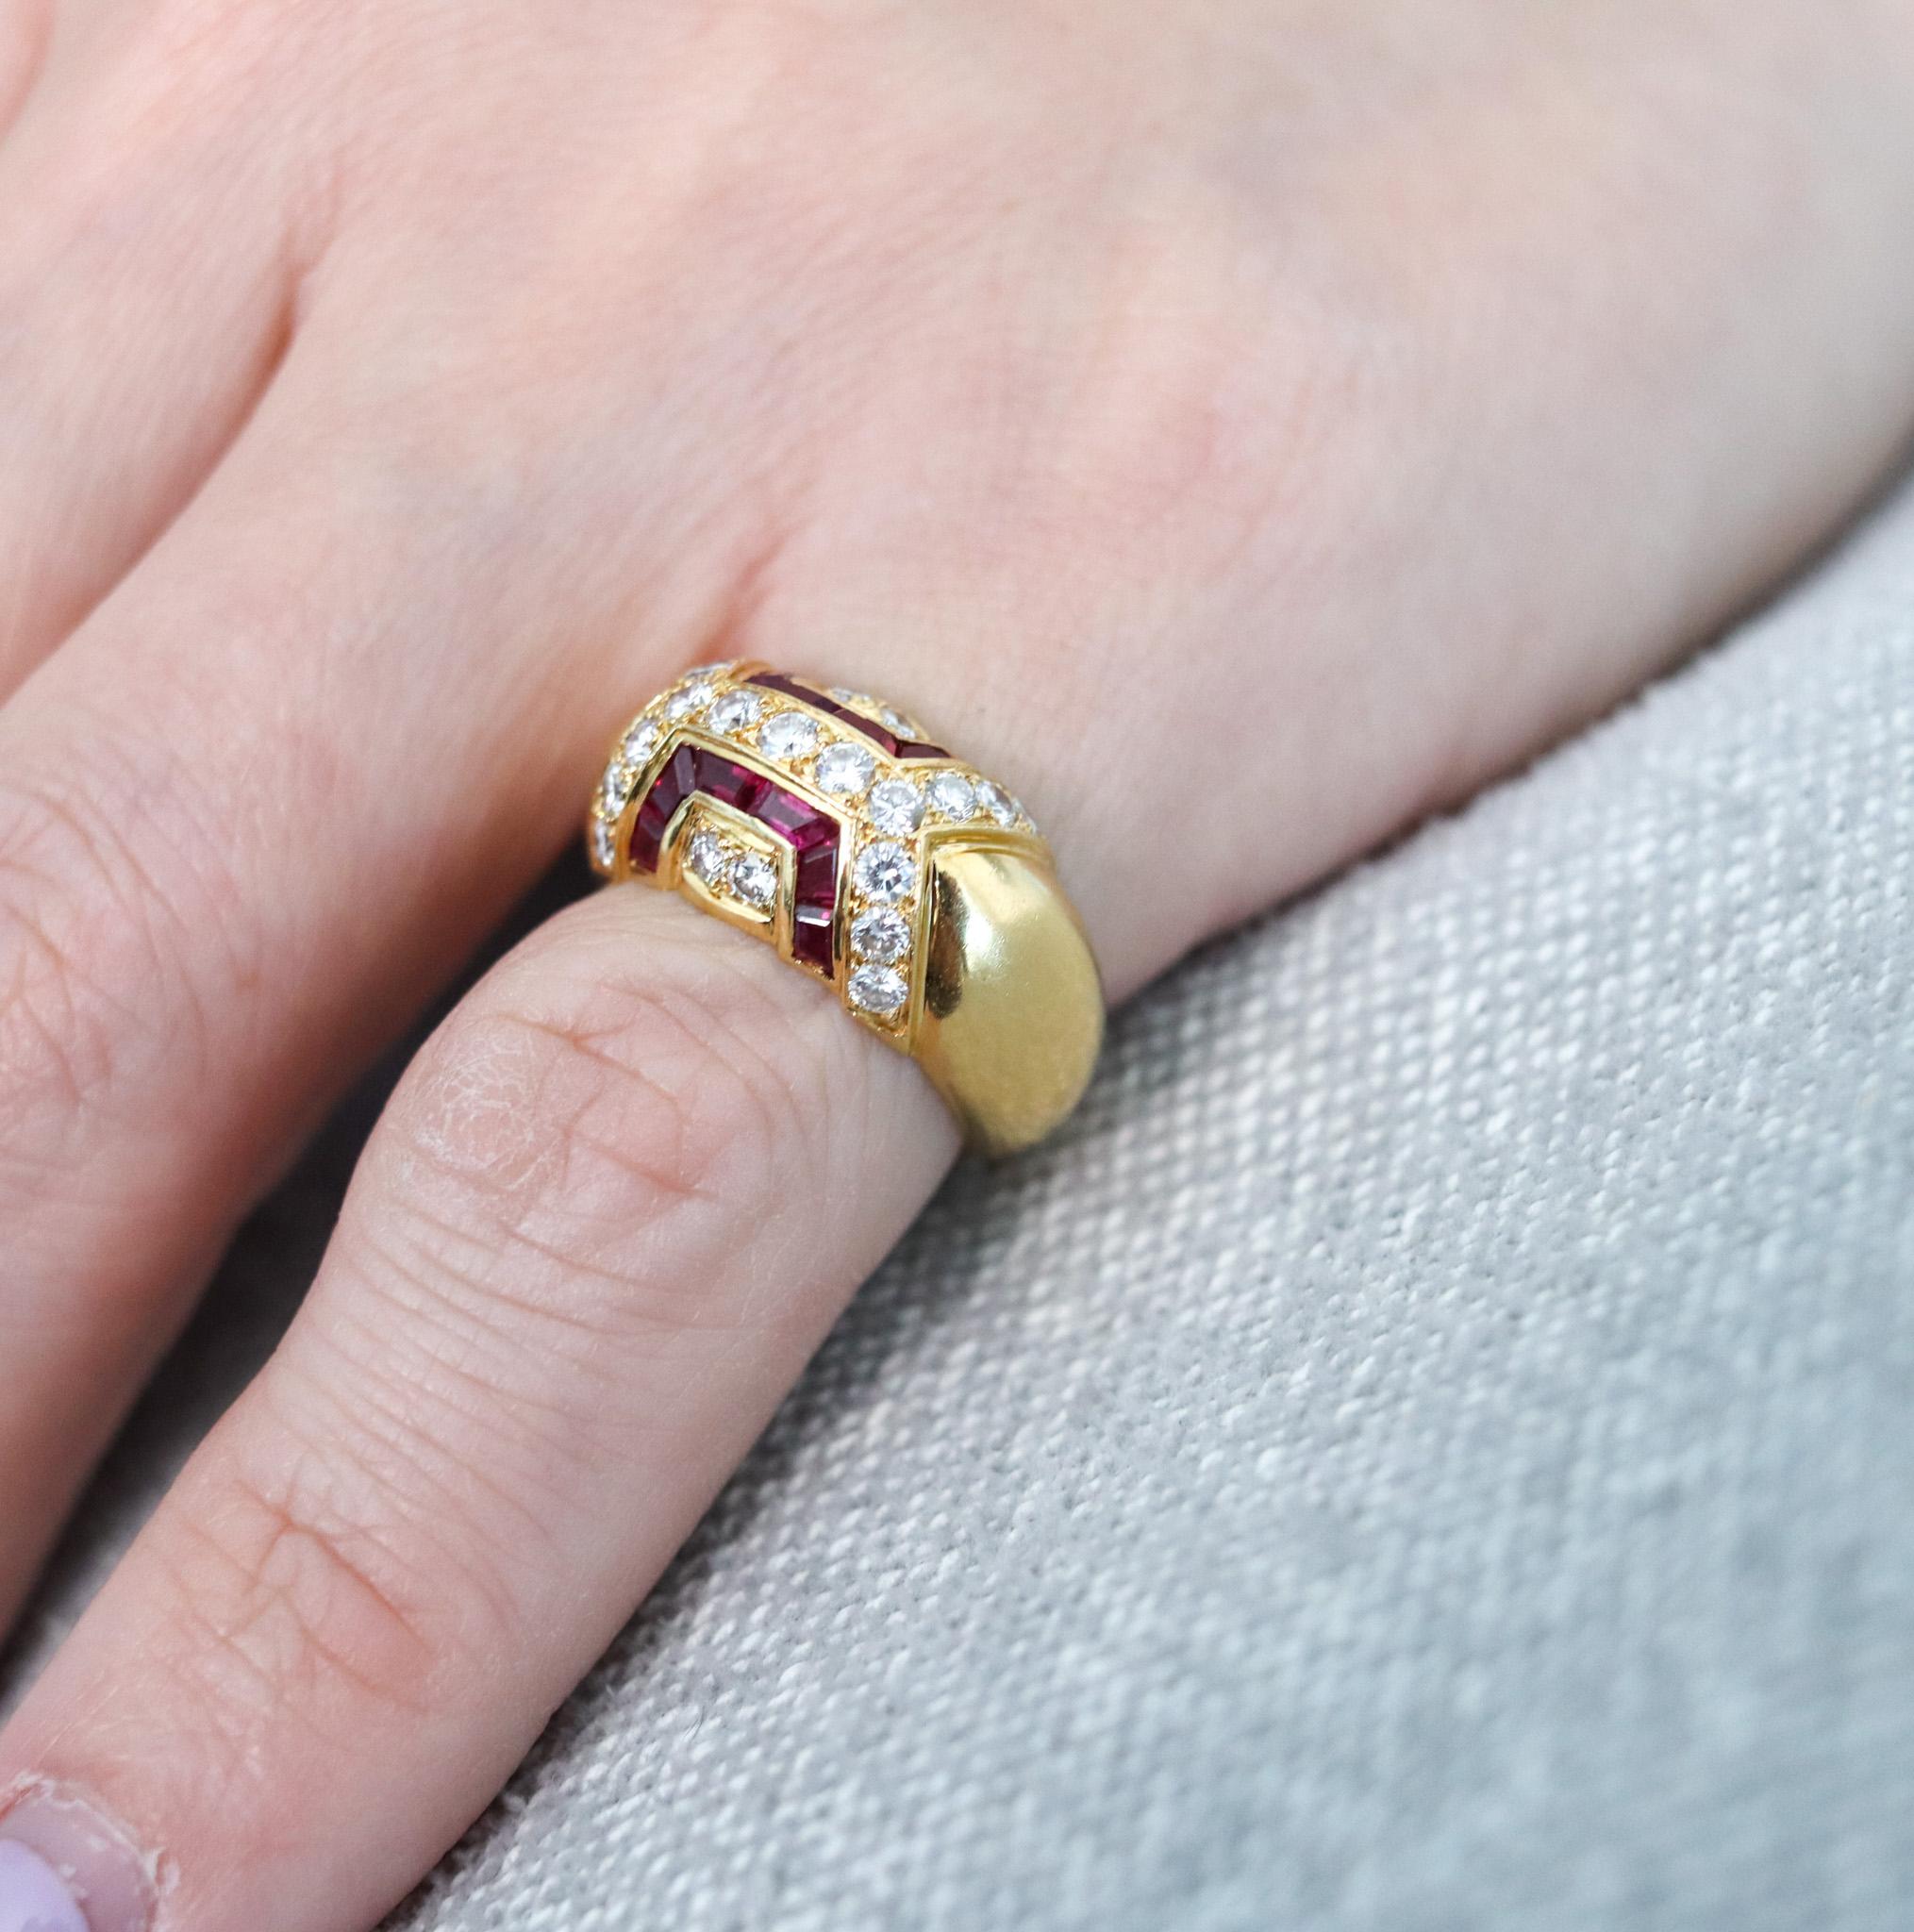 Boucheron Paris Modernist Ring In 18Kt Gold With 1.94 Ctw In Diamonds And Rubies For Sale 4